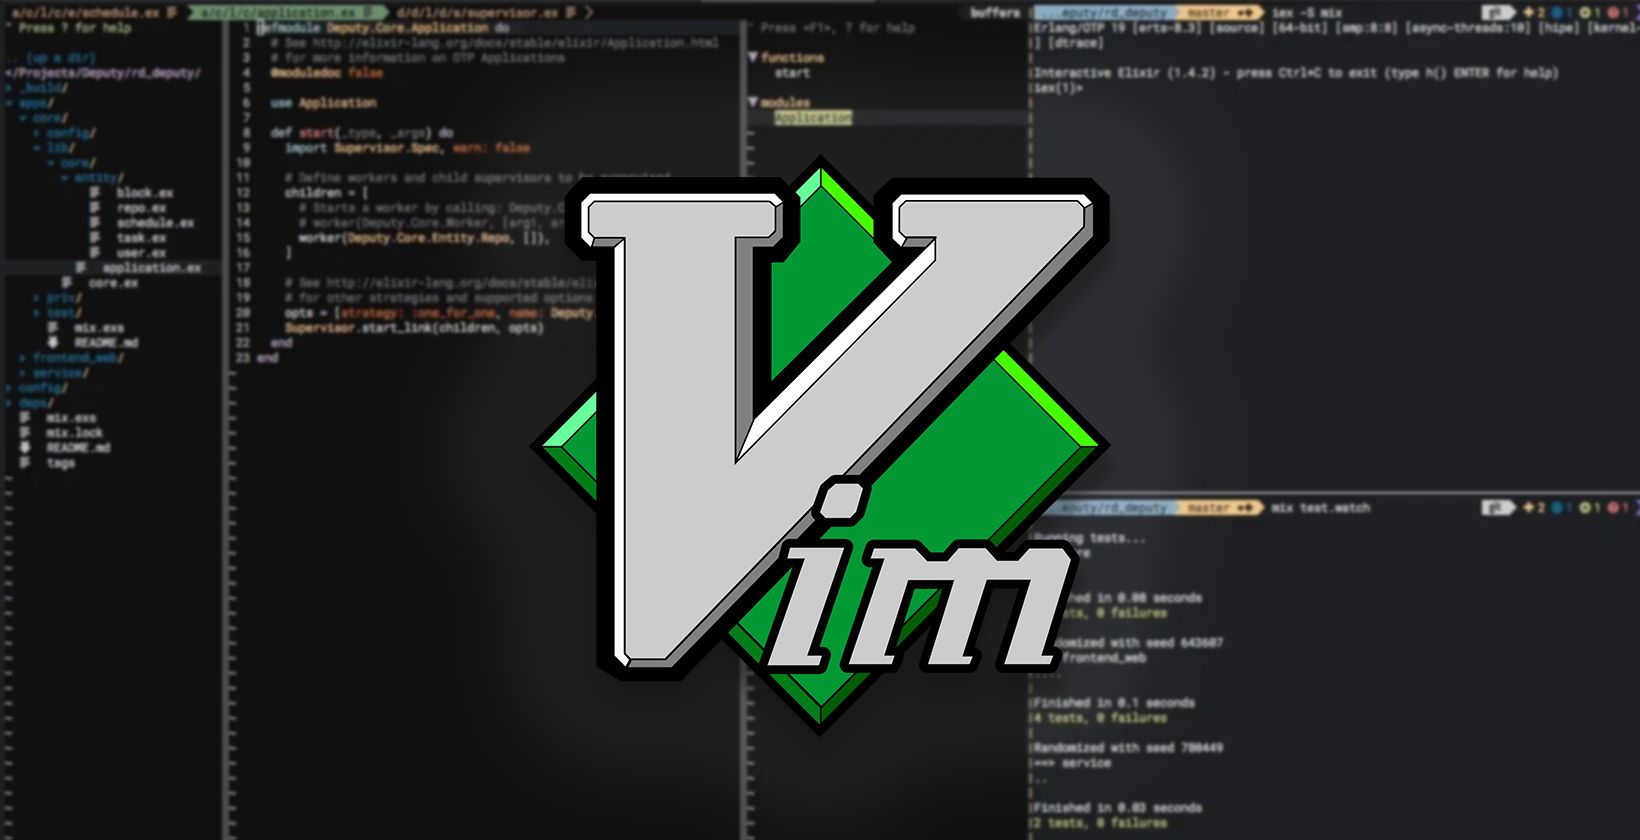 The VIM logo over a blurred image of the VIM editor in use.